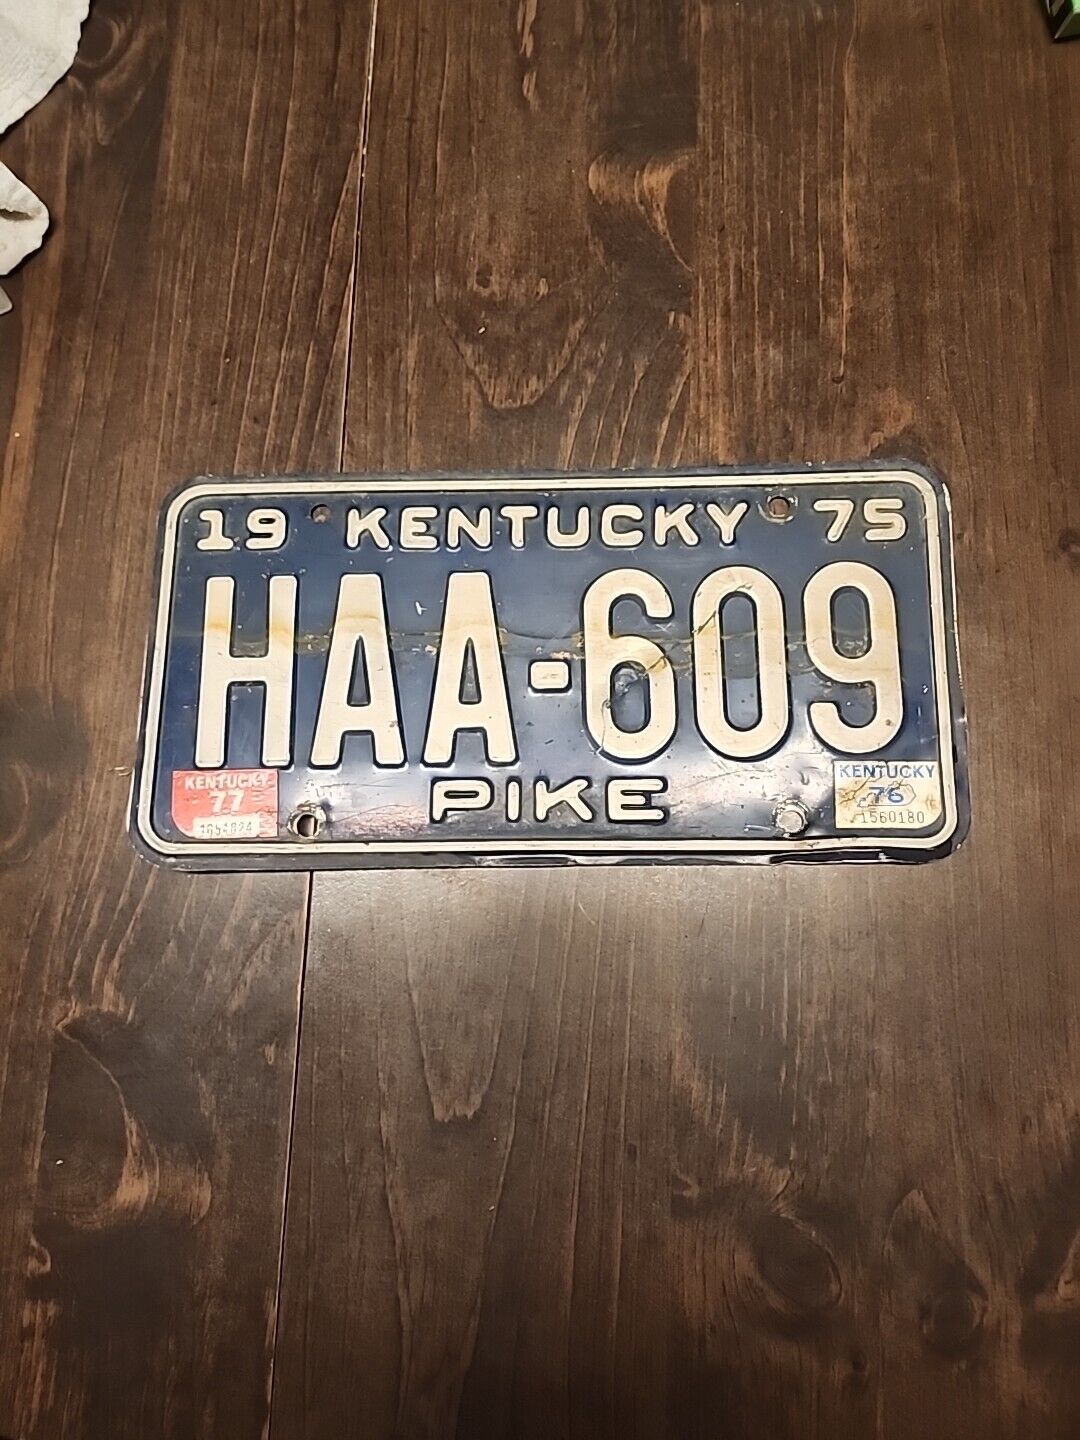 Vintage Old Kentucky License Plate 1976/77  Tag # HAA-609